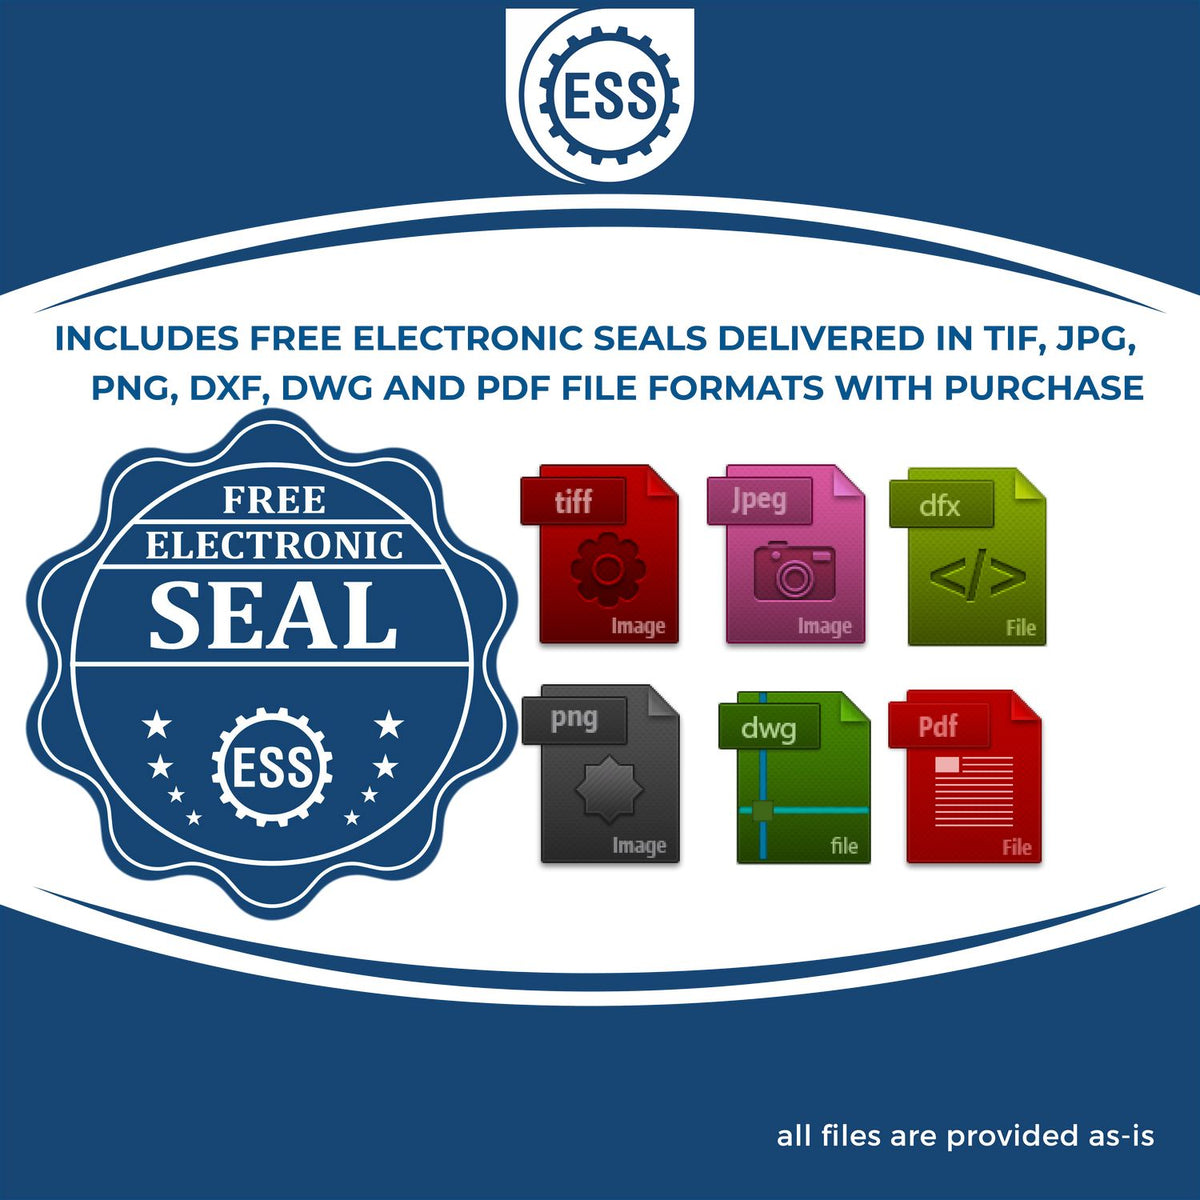 An infographic for the free electronic seal for the Hybrid Kentucky Geologist Seal illustrating the different file type icons such as DXF, DWG, TIF, JPG and PNG.